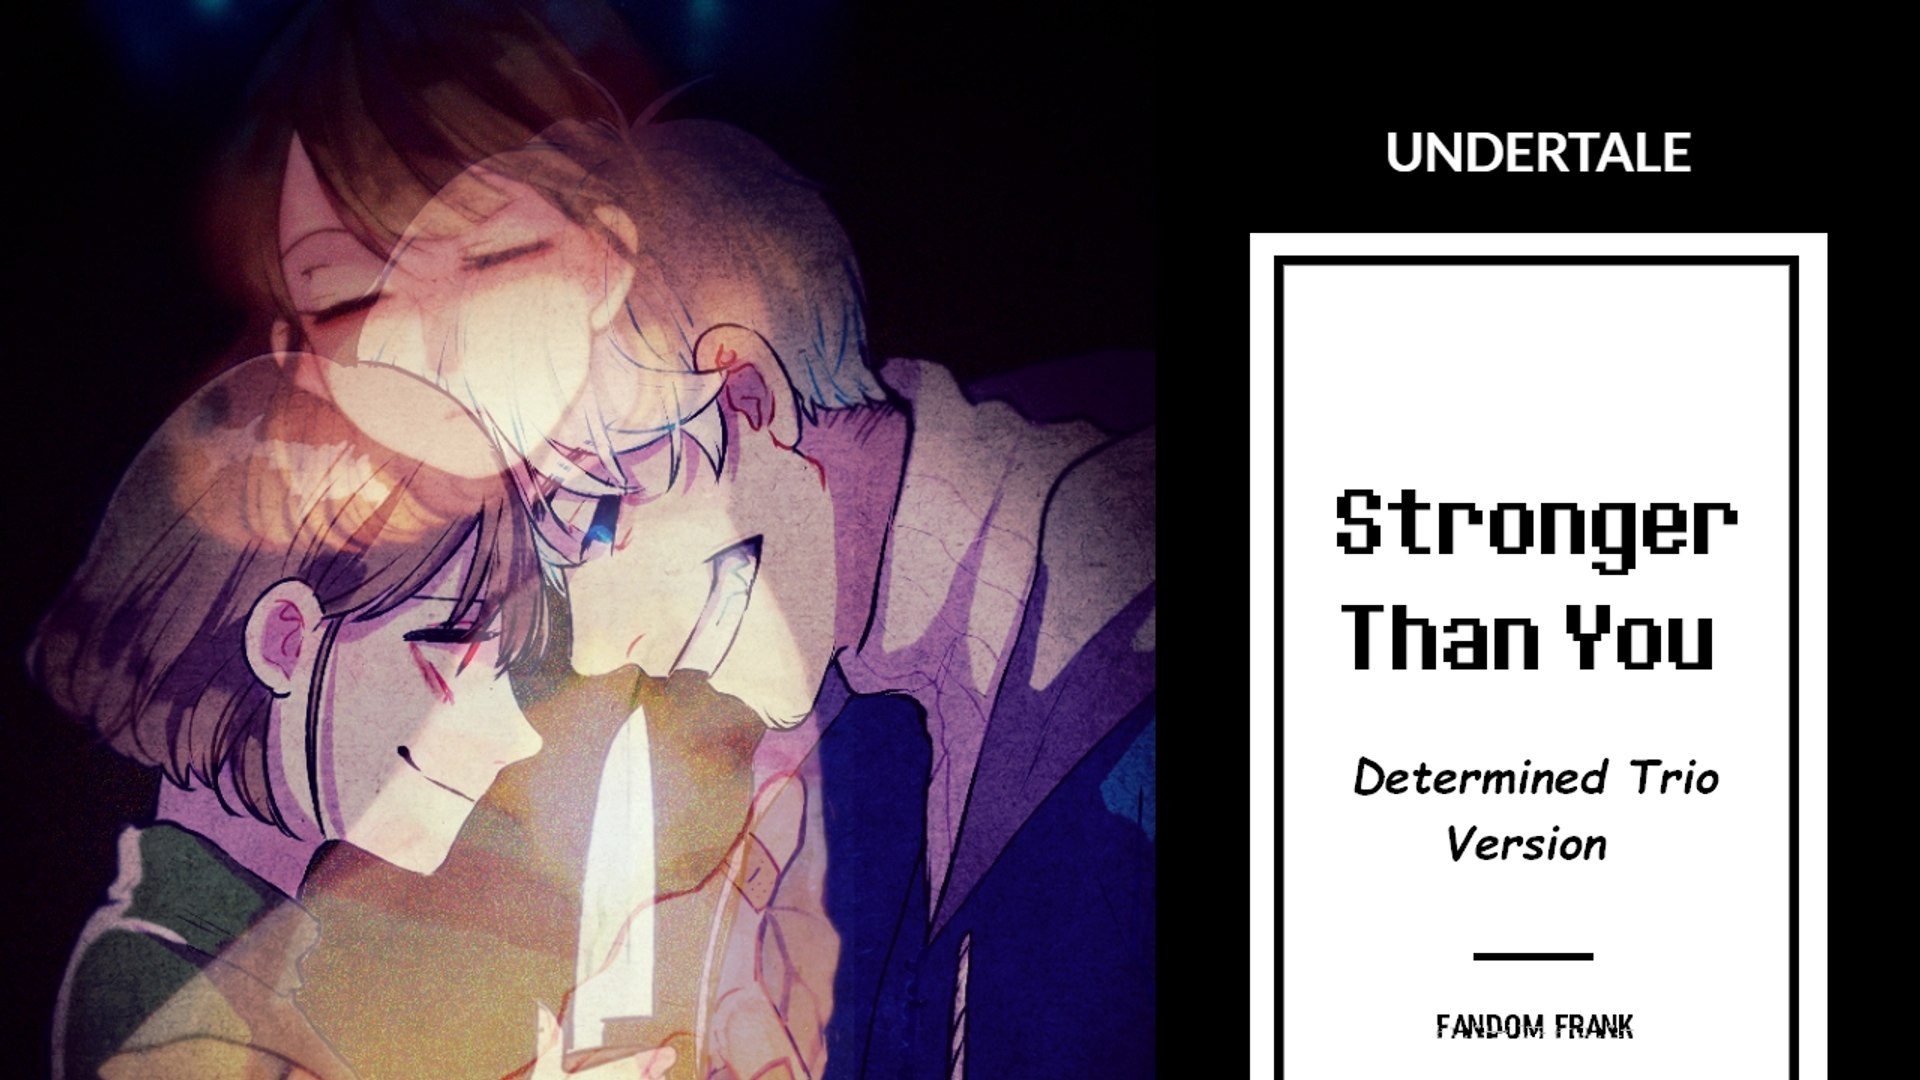 Stronger than you cover. Андертейл stronger than you. Трио андертейл. Stronger Undertale. Stronger than you response.